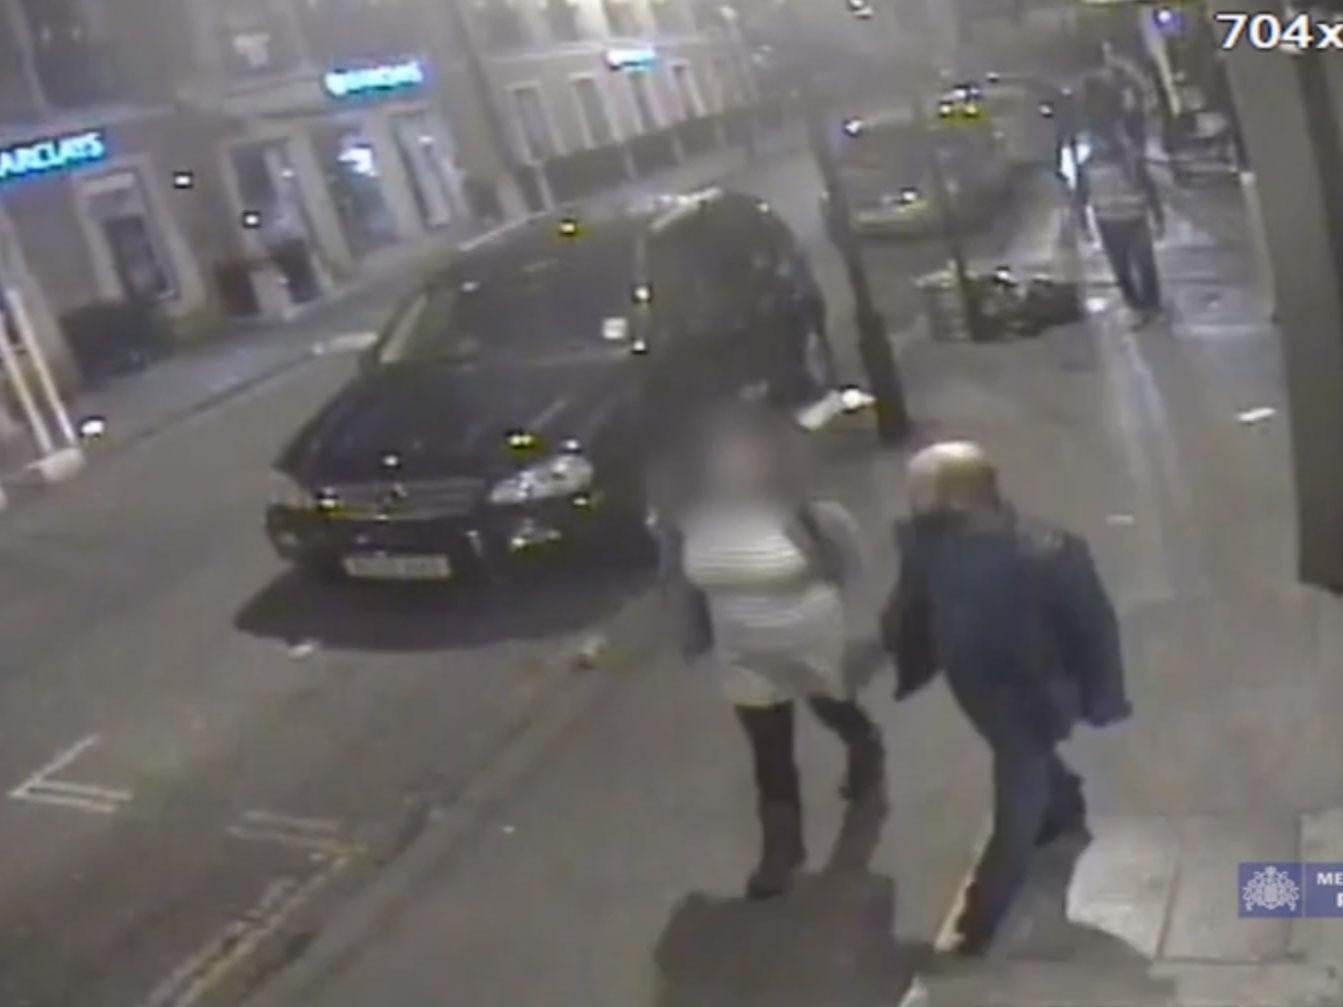 Cctv Footage Shows Woman Led Away Through Central London Streets To Be